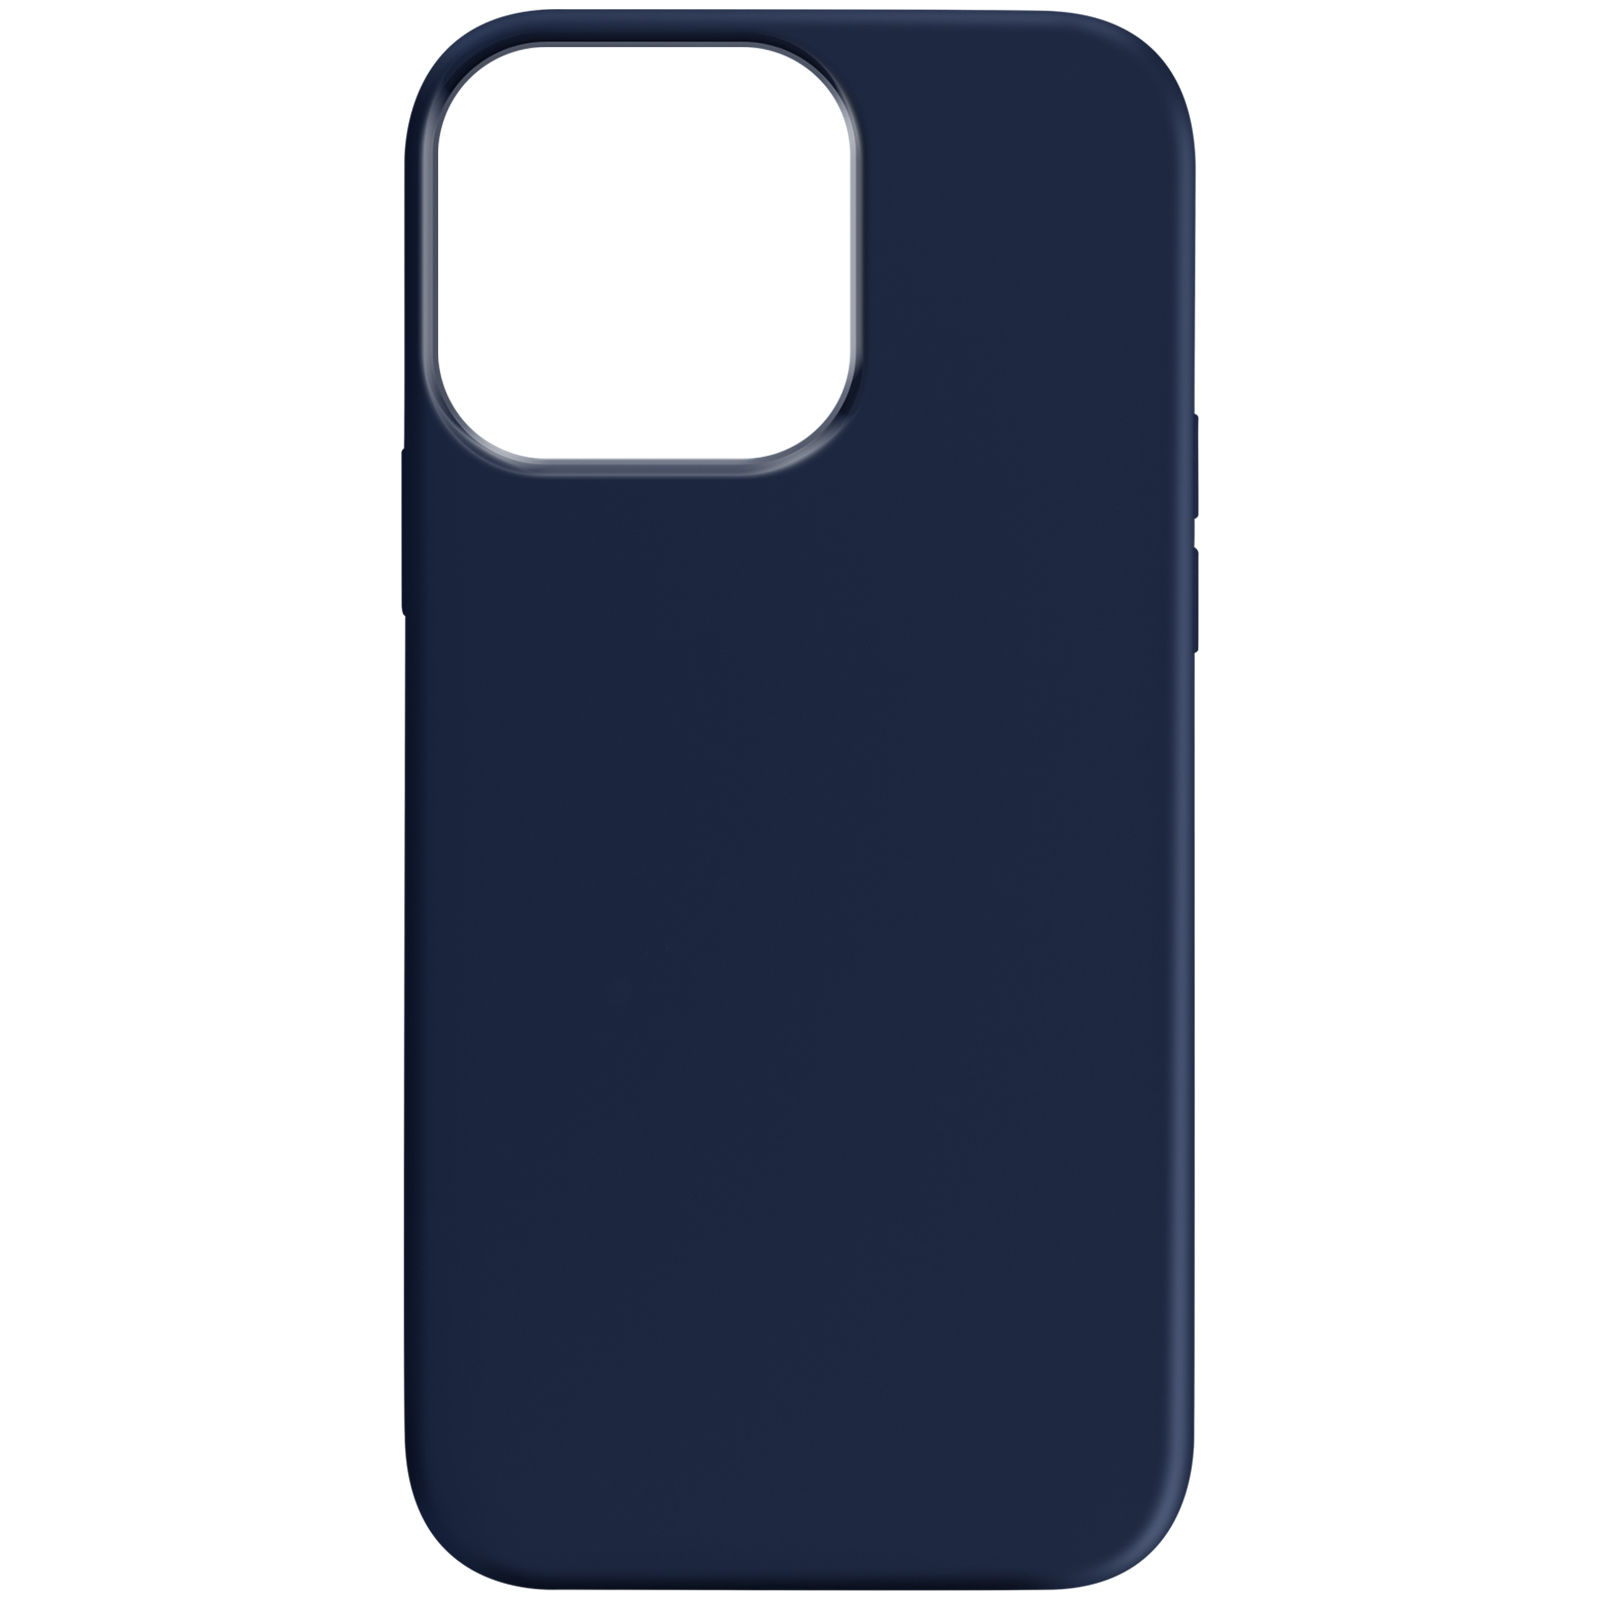 Backcover, AVIZAR 15 Series, Max, Dunkelblau iPhone Pro Soft Touch Apple,